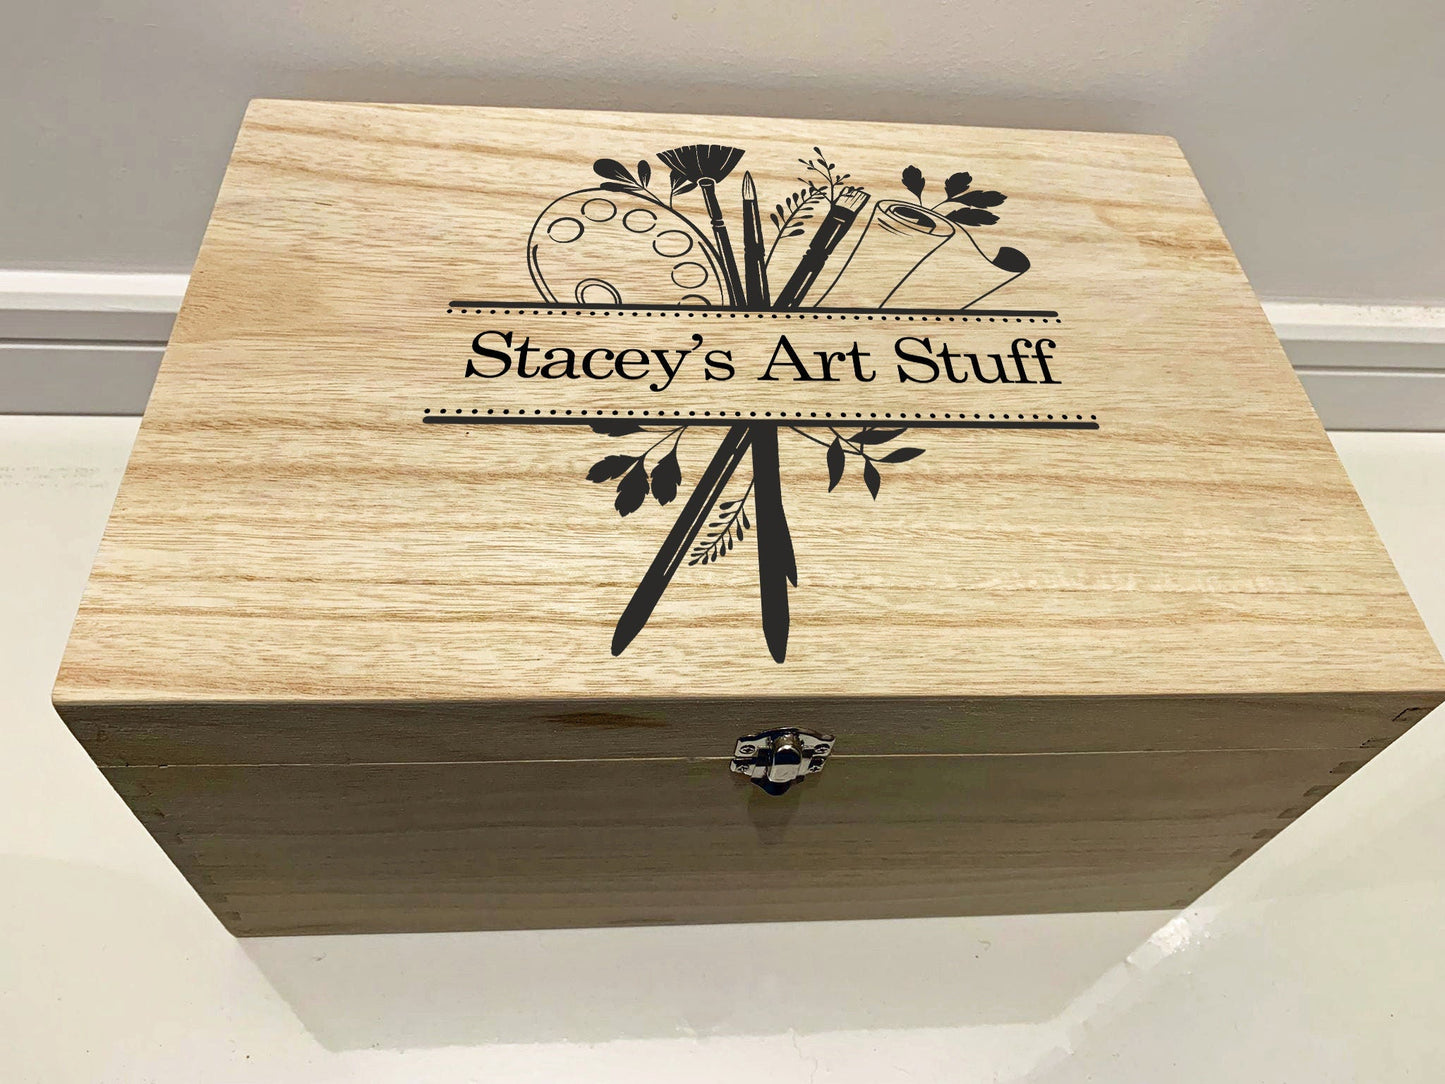 Large Personalised Engraved Wooden Art Box with Paintbrush and Palette design - Resplendent Aurora